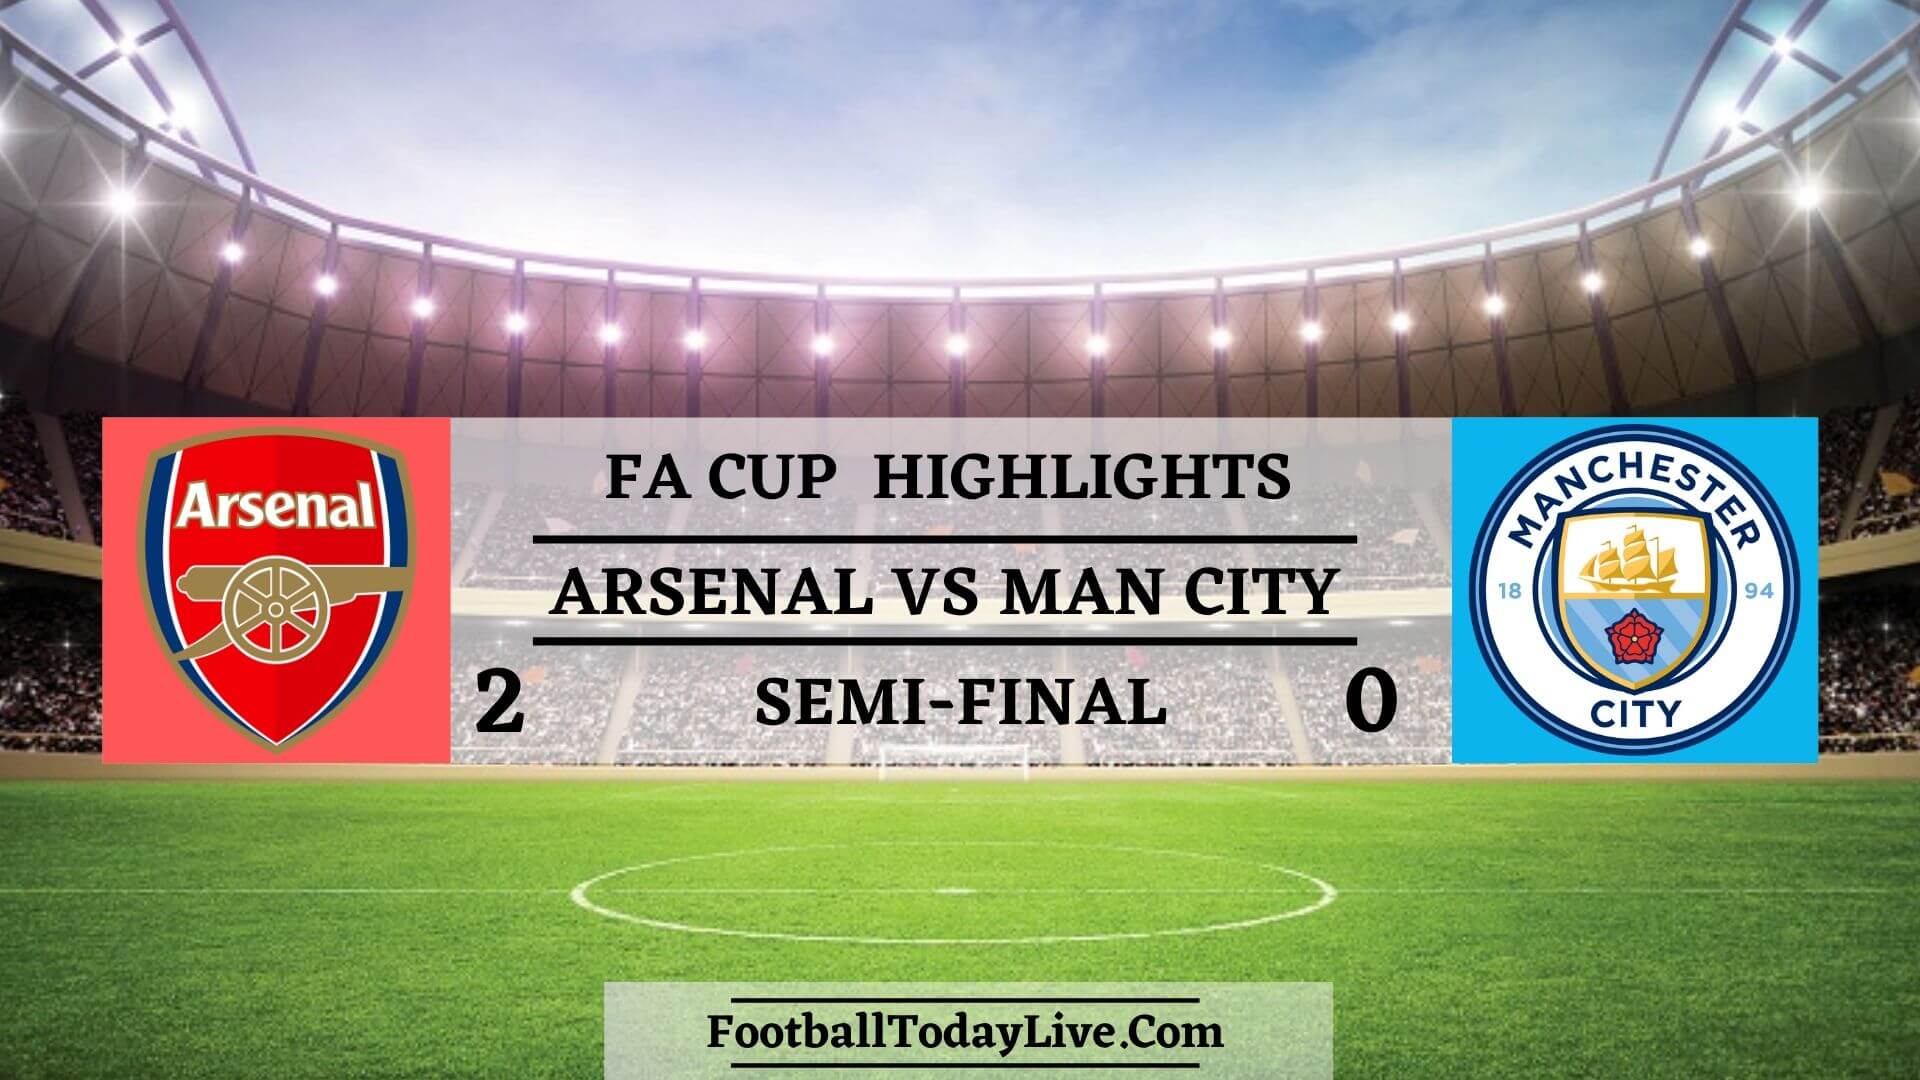 Arsenal Vs Manchester City Highlights 2020 FA Cup SF